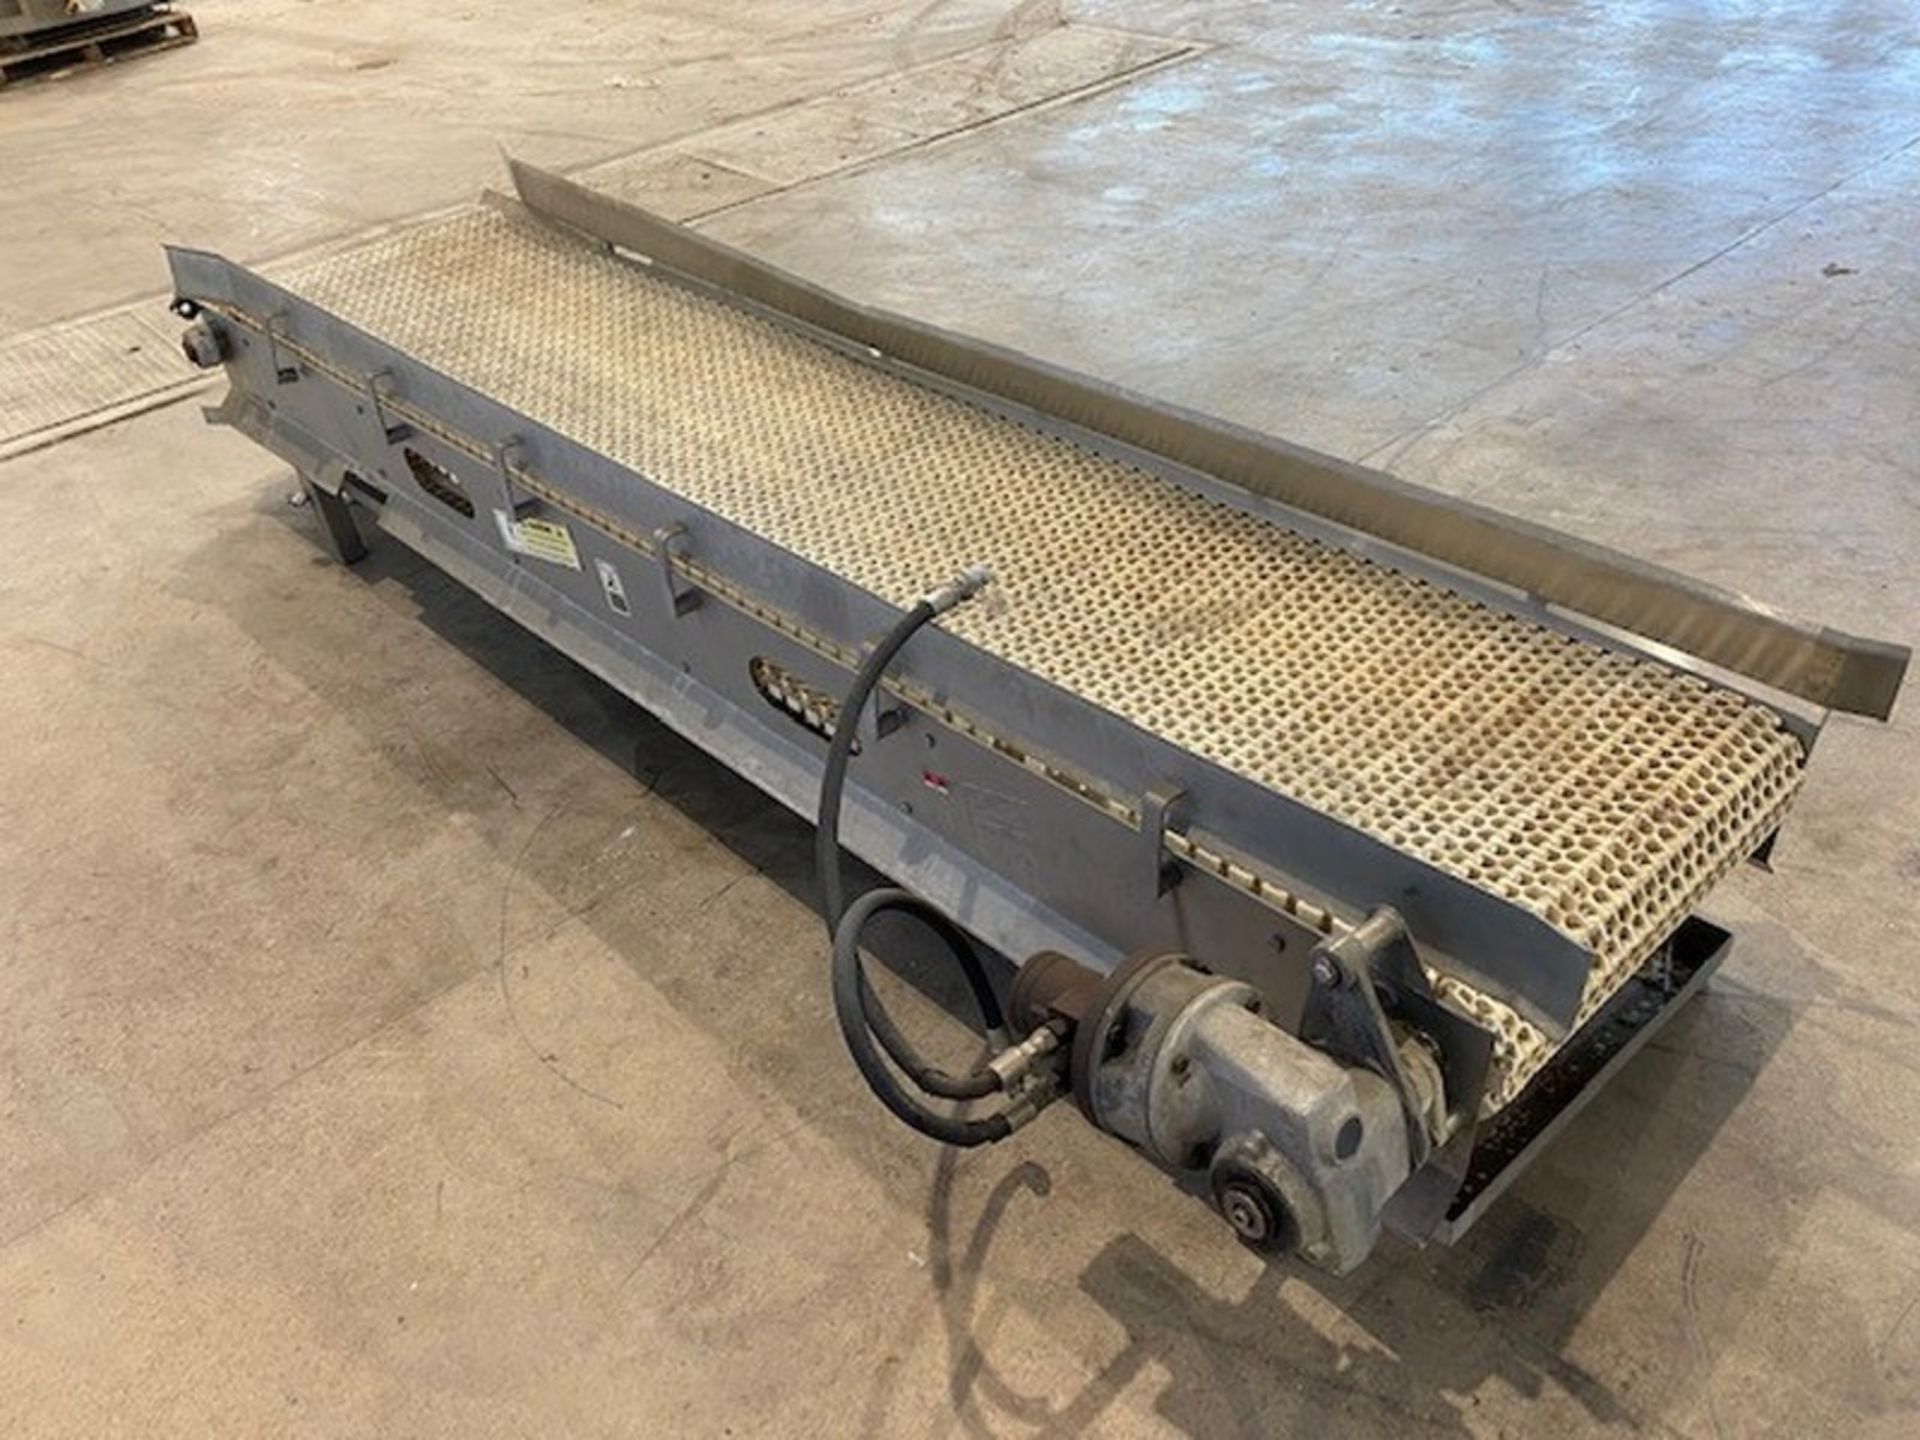 Straight Section of Conveyor,Aprox. 114" L, with Aprox. 24" W Plastic Interlock Belt, - Image 5 of 5